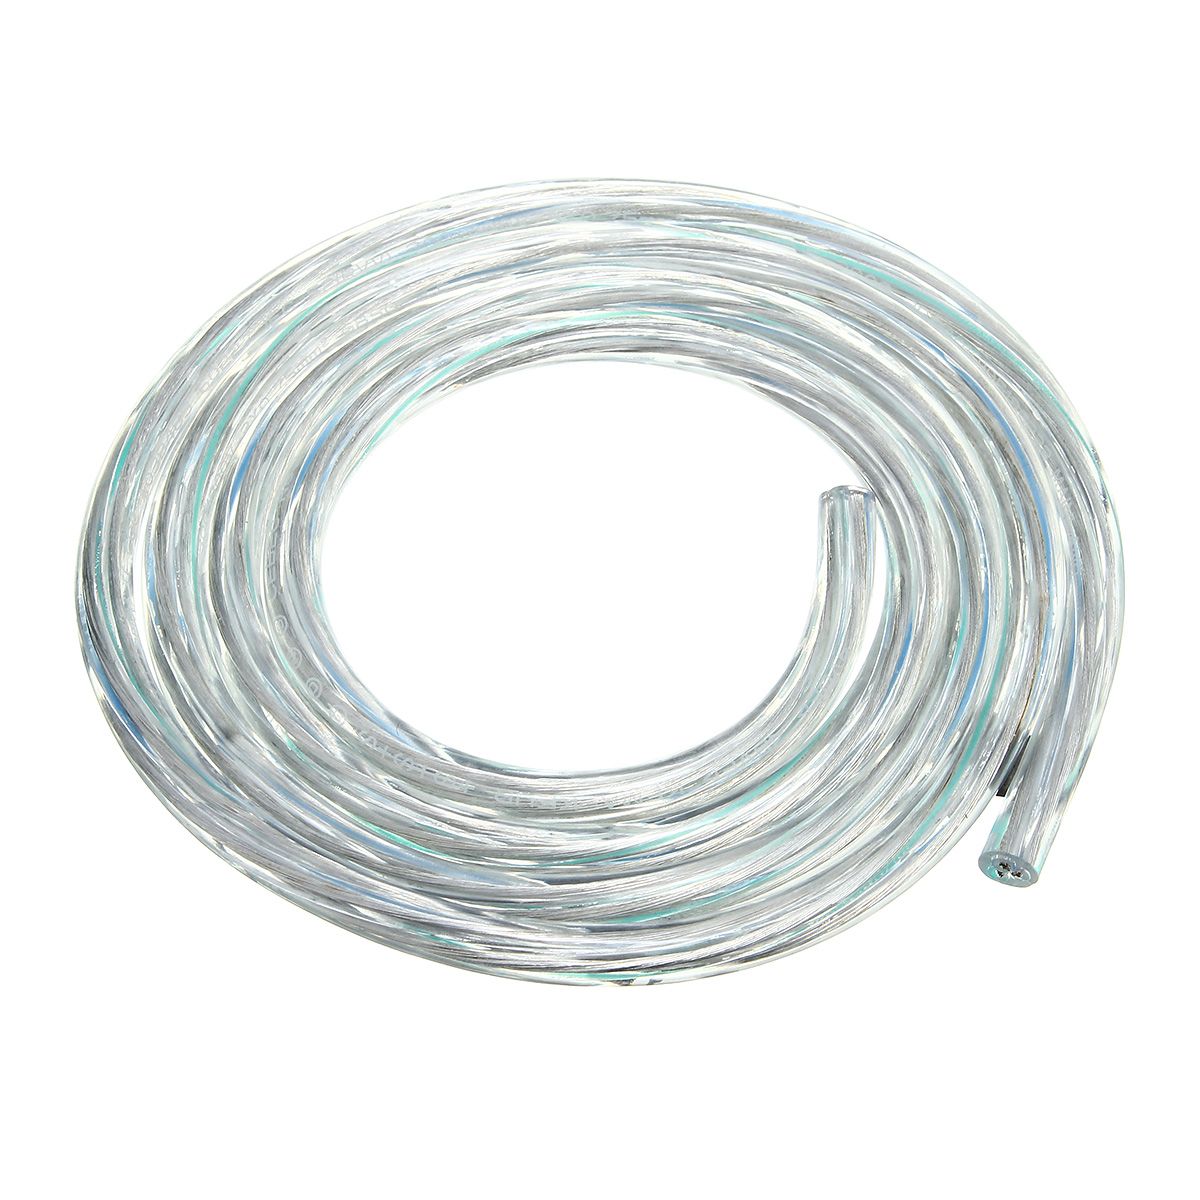 1M-3-Core-PVC-Lamp-Switch-Wire-DIY-Electrical-Cable-Vintage-Light-Cord-1271143